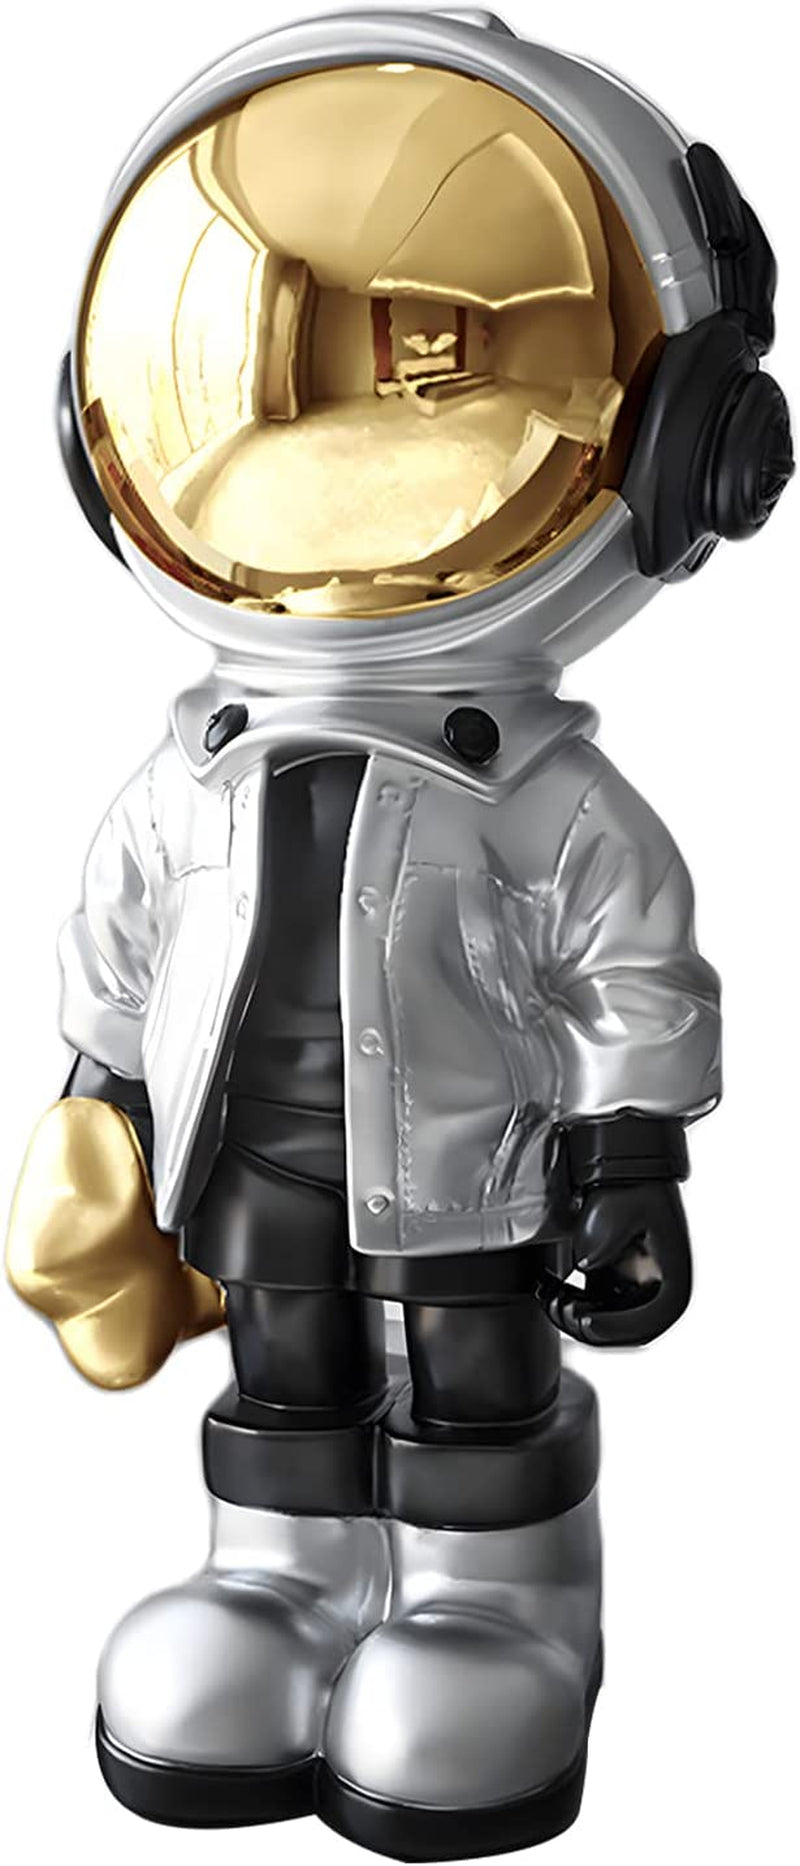 Dosker Astronaut Statues Spaceman Sculpture Polyresin Arts Gifts Orange Figurine Ornament Room Decor for Men,Home and Crafts Desktop Accessories Tabletop Decoration, Living Room, Office, Bookshelf  ZY2417 Silver  